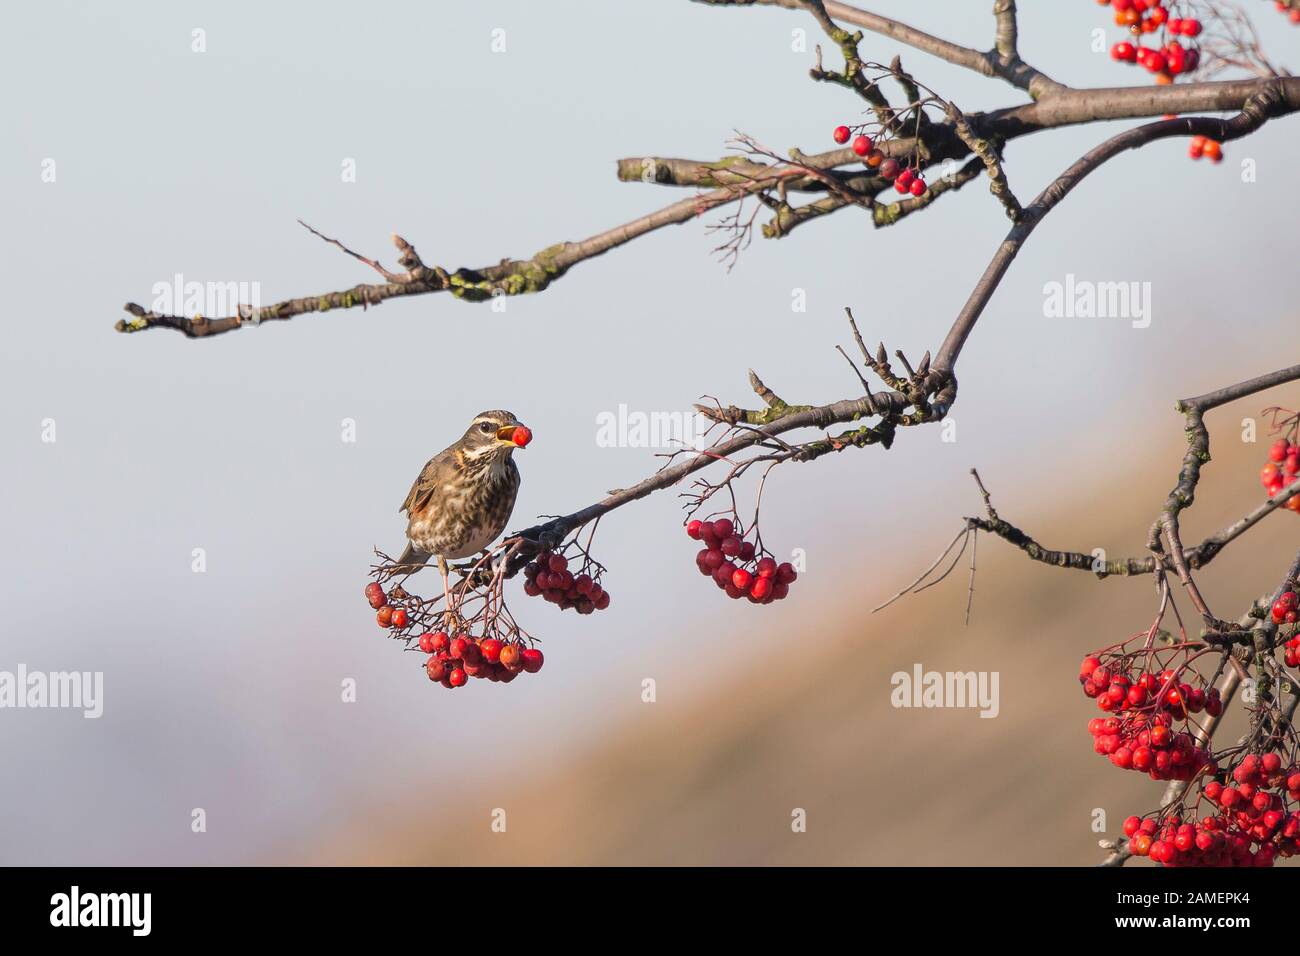 Close up of wild UK redwing bird (Turdus iliacus) isolated outdoors, perched on tree branch, eating berries in winter sunshine. British birds. Stock Photo